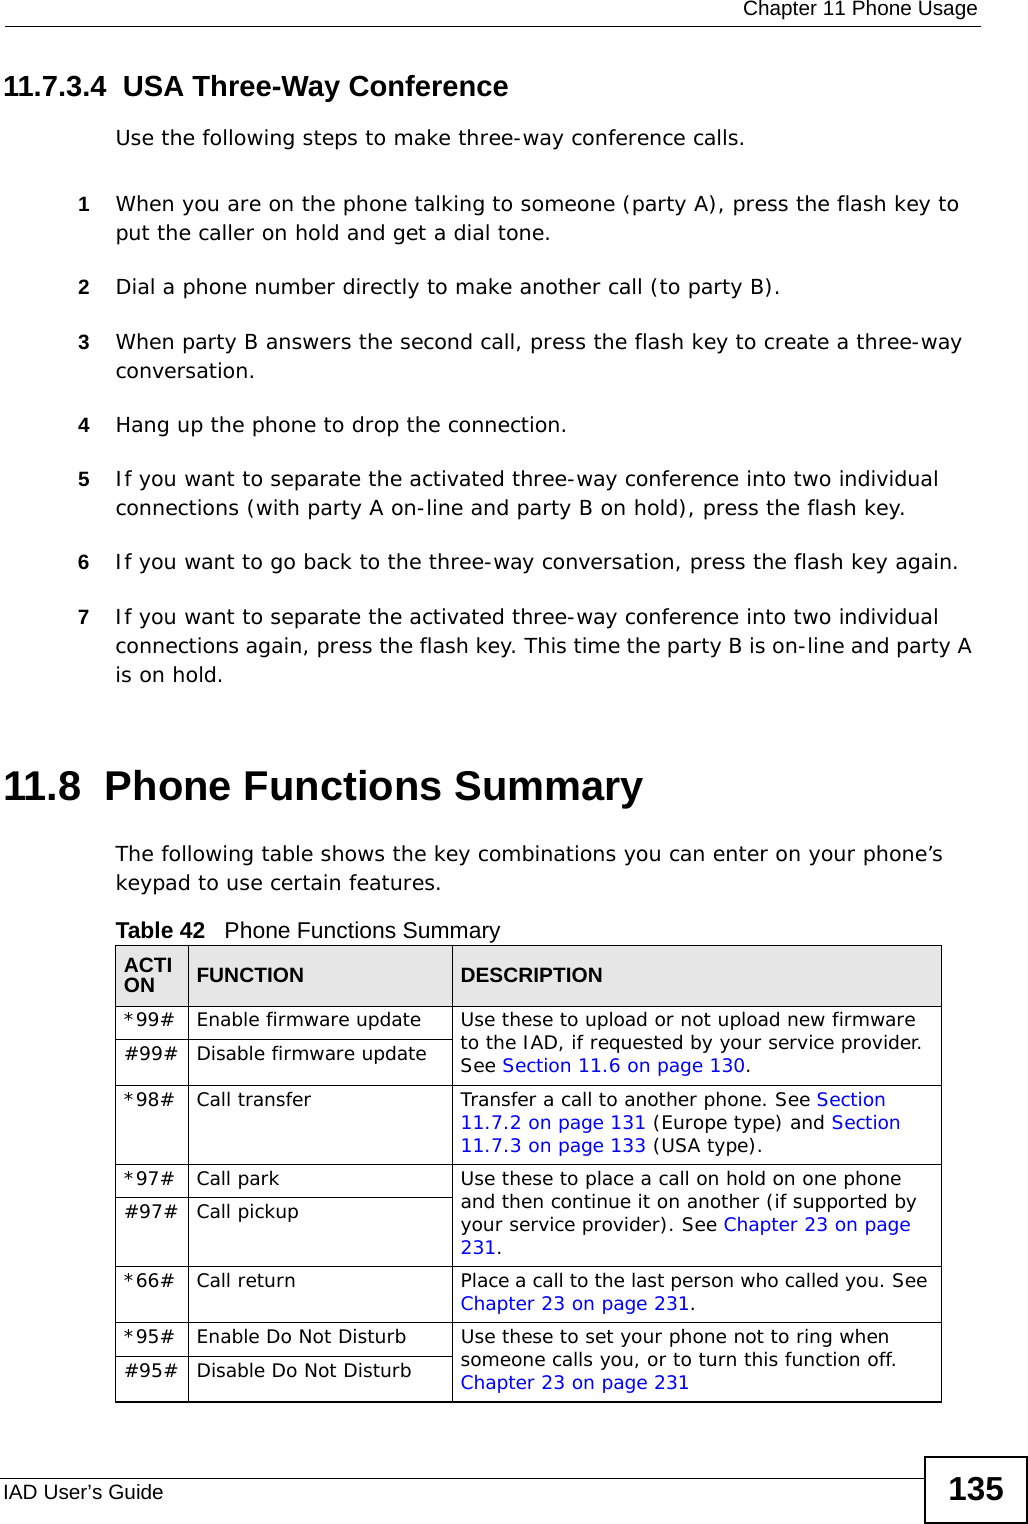  Chapter 11 Phone UsageIAD User’s Guide 13511.7.3.4  USA Three-Way ConferenceUse the following steps to make three-way conference calls.1When you are on the phone talking to someone (party A), press the flash key to put the caller on hold and get a dial tone. 2Dial a phone number directly to make another call (to party B).3When party B answers the second call, press the flash key to create a three-way conversation.4Hang up the phone to drop the connection.5If you want to separate the activated three-way conference into two individual connections (with party A on-line and party B on hold), press the flash key.  6If you want to go back to the three-way conversation, press the flash key again.7If you want to separate the activated three-way conference into two individual connections again, press the flash key. This time the party B is on-line and party A is on hold.  11.8  Phone Functions SummaryThe following table shows the key combinations you can enter on your phone’s keypad to use certain features. Table 42   Phone Functions SummaryACTION FUNCTION DESCRIPTION*99#  Enable firmware update Use these to upload or not upload new firmware to the IAD, if requested by your service provider. See Section 11.6 on page 130.#99# Disable firmware update*98#  Call transfer Transfer a call to another phone. See Section 11.7.2 on page 131 (Europe type) and Section 11.7.3 on page 133 (USA type).*97#  Call park Use these to place a call on hold on one phone and then continue it on another (if supported by your service provider). See Chapter 23 on page 231.#97# Call pickup*66# Call return Place a call to the last person who called you. See Chapter 23 on page 231.*95# Enable Do Not Disturb Use these to set your phone not to ring when someone calls you, or to turn this function off. Chapter 23 on page 231#95# Disable Do Not Disturb